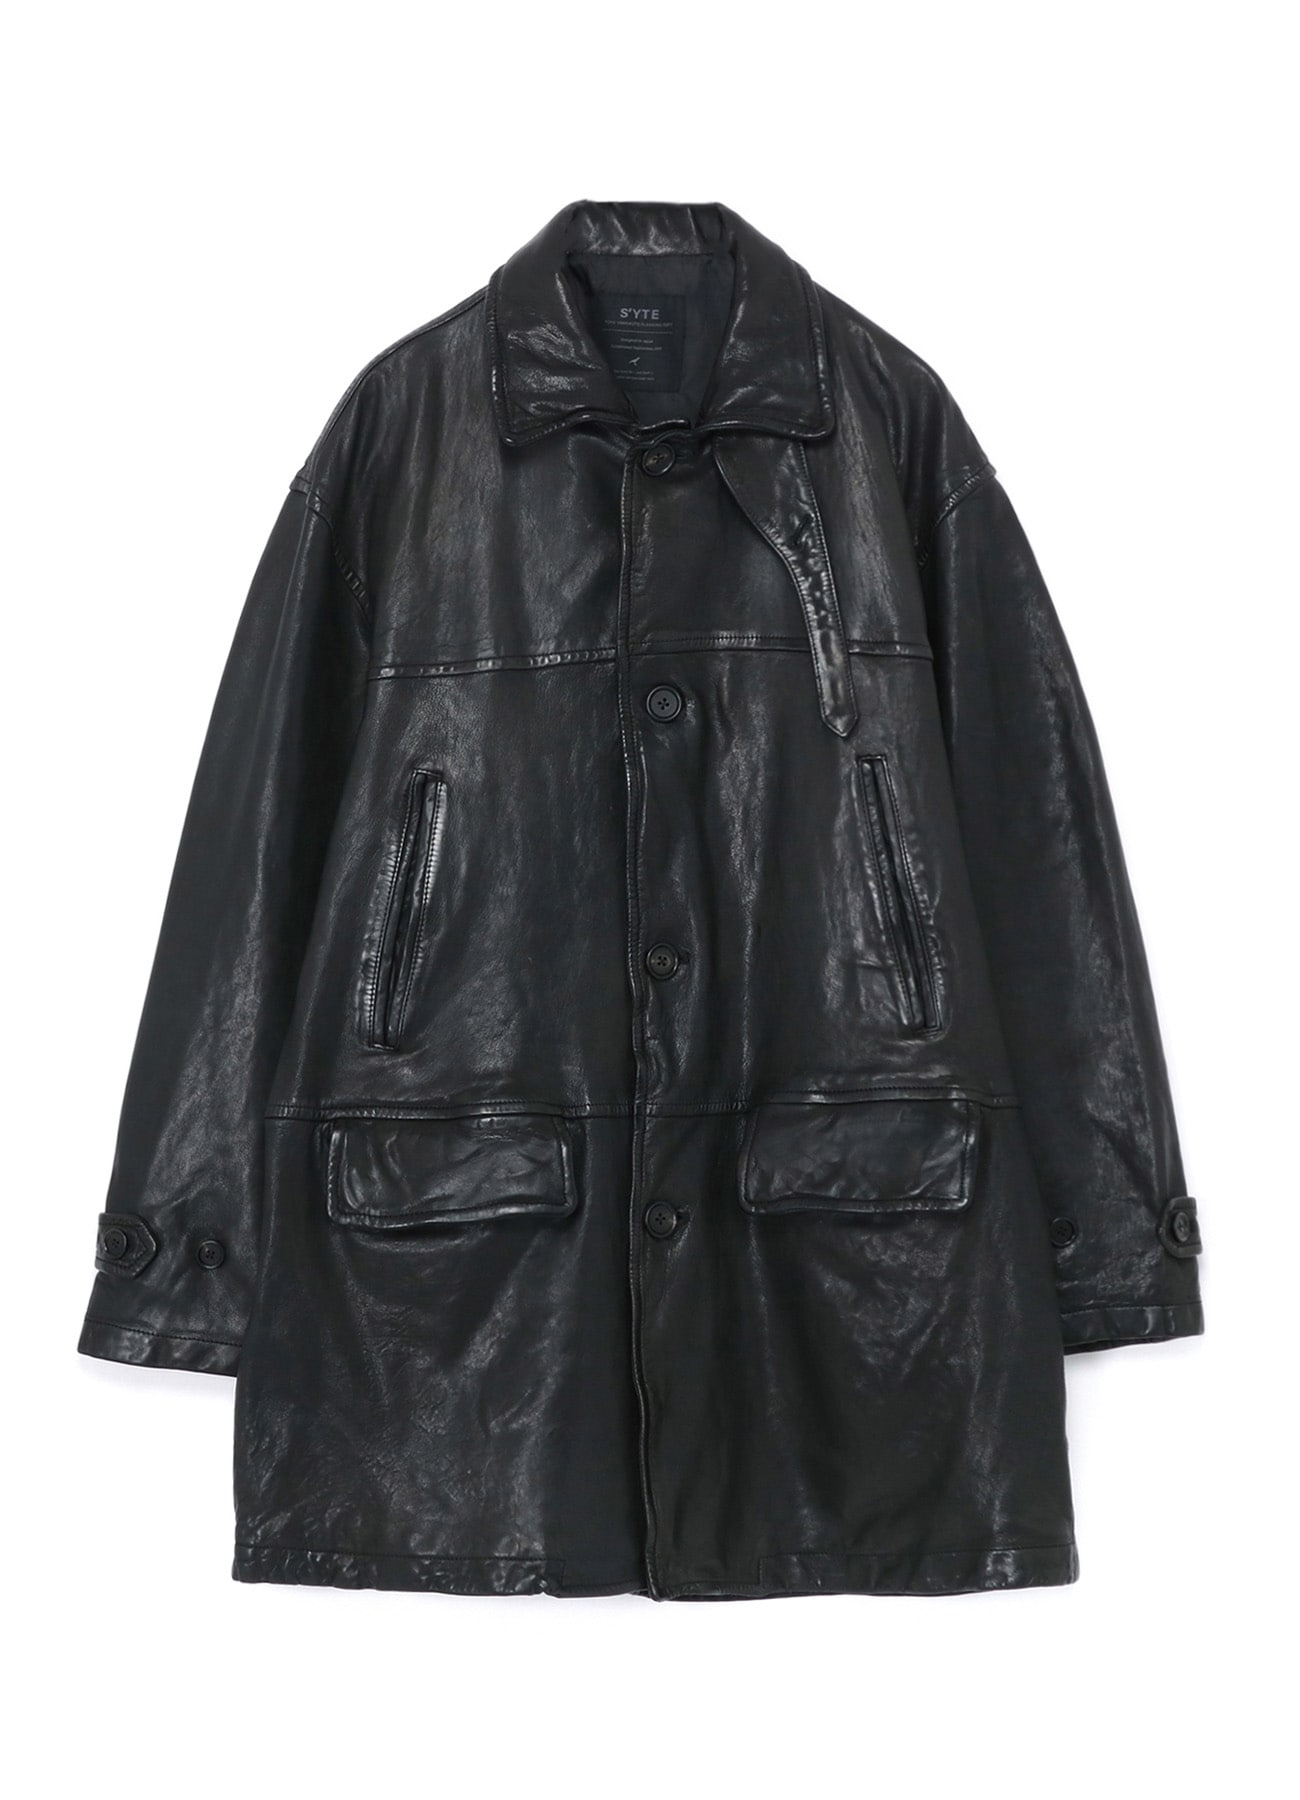 VEGETABLE TANNED AND WASHED SHEEP LEATHER  CAR COAT